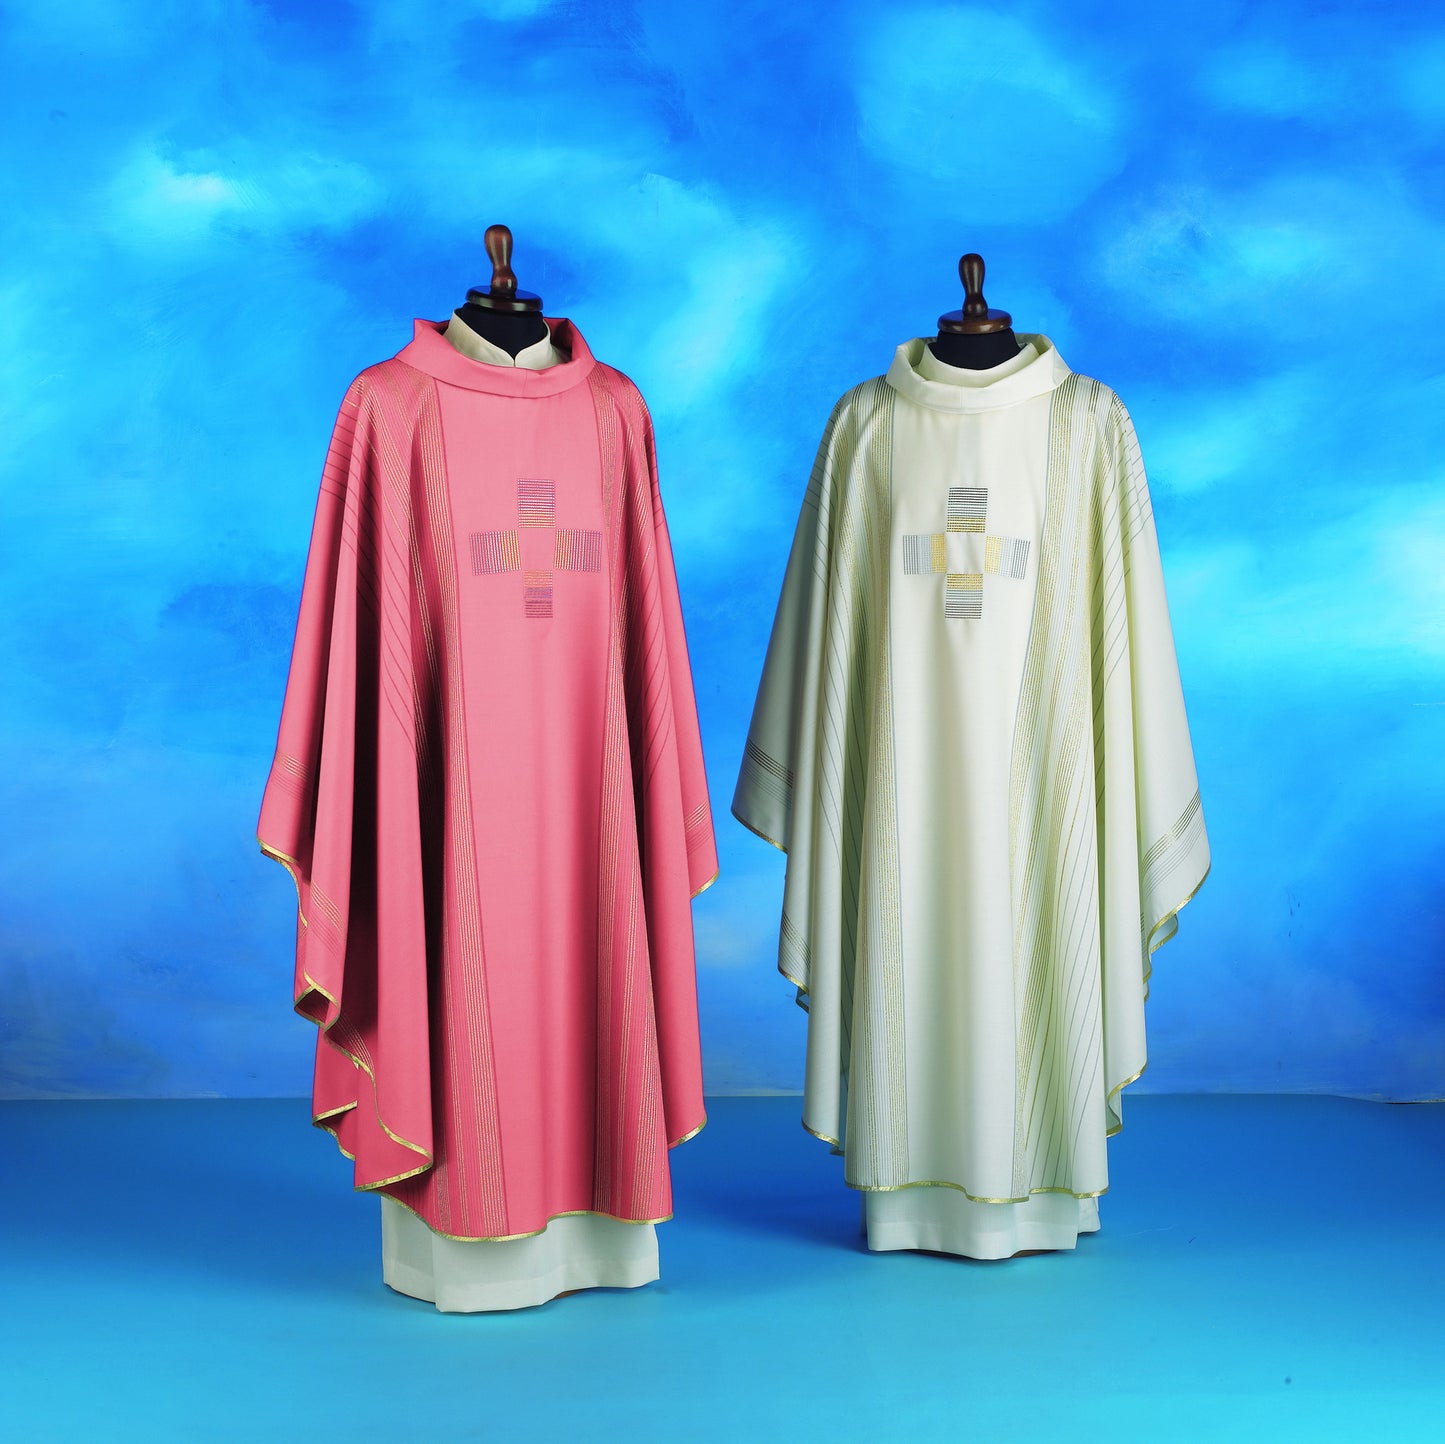 Gothic Chasuble | Soft Wool | Matching Underlay Stole Included - Solivari - Chiarelli's Religious Goods & Church Supply